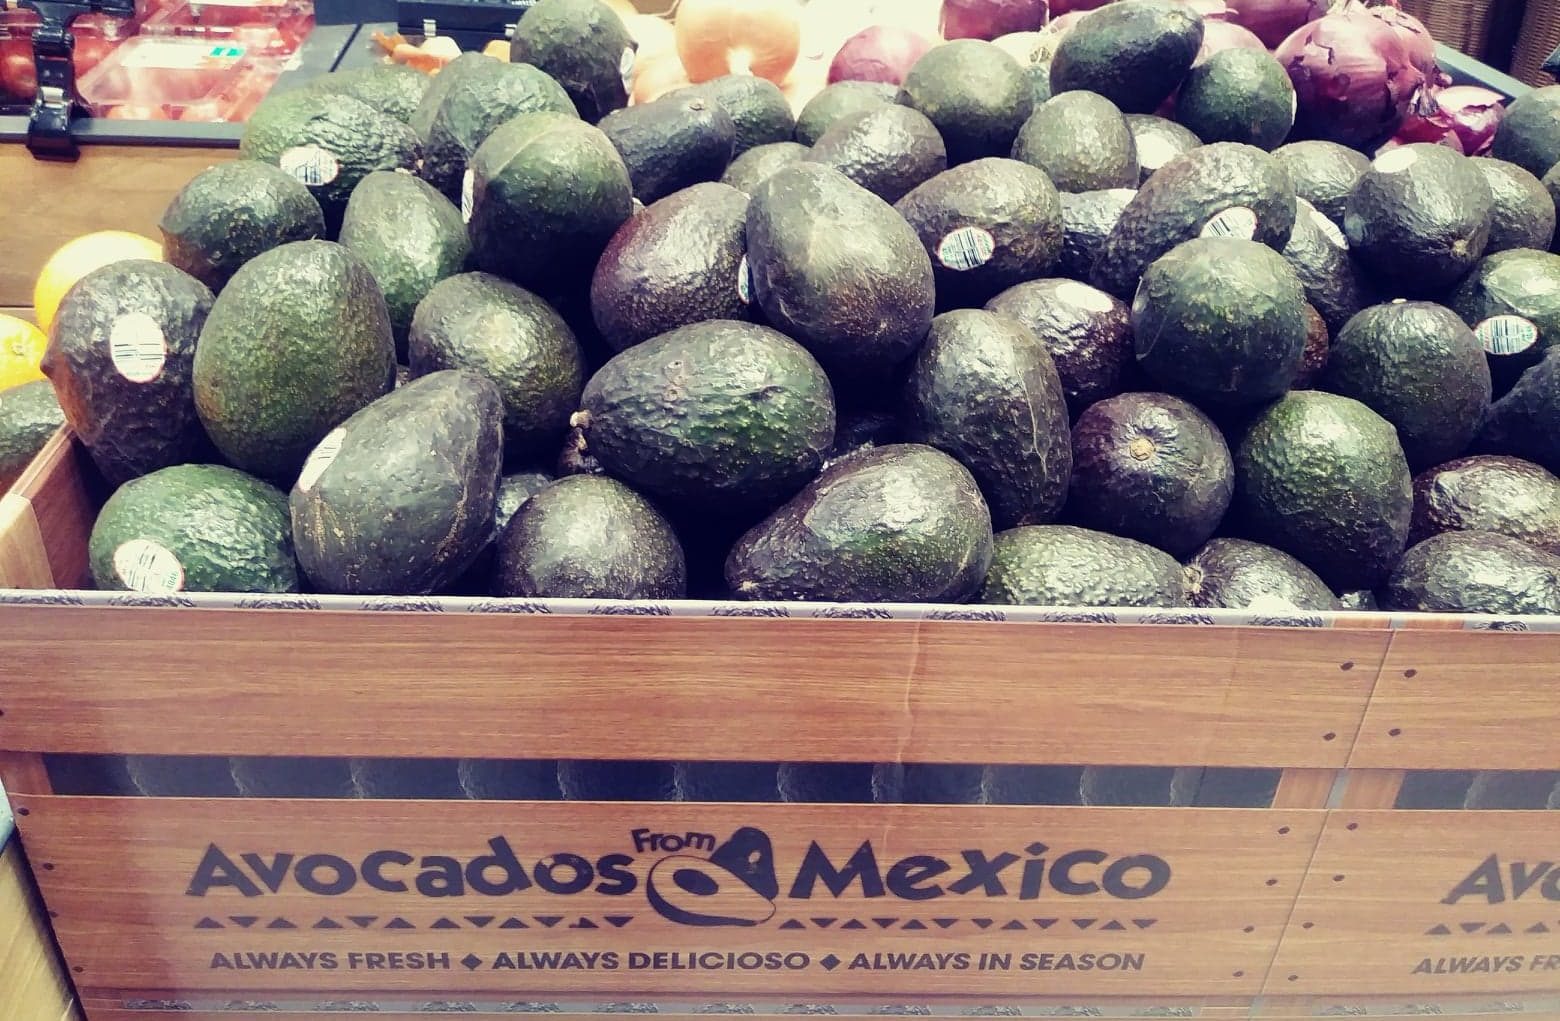 bin of avocados from Mexico